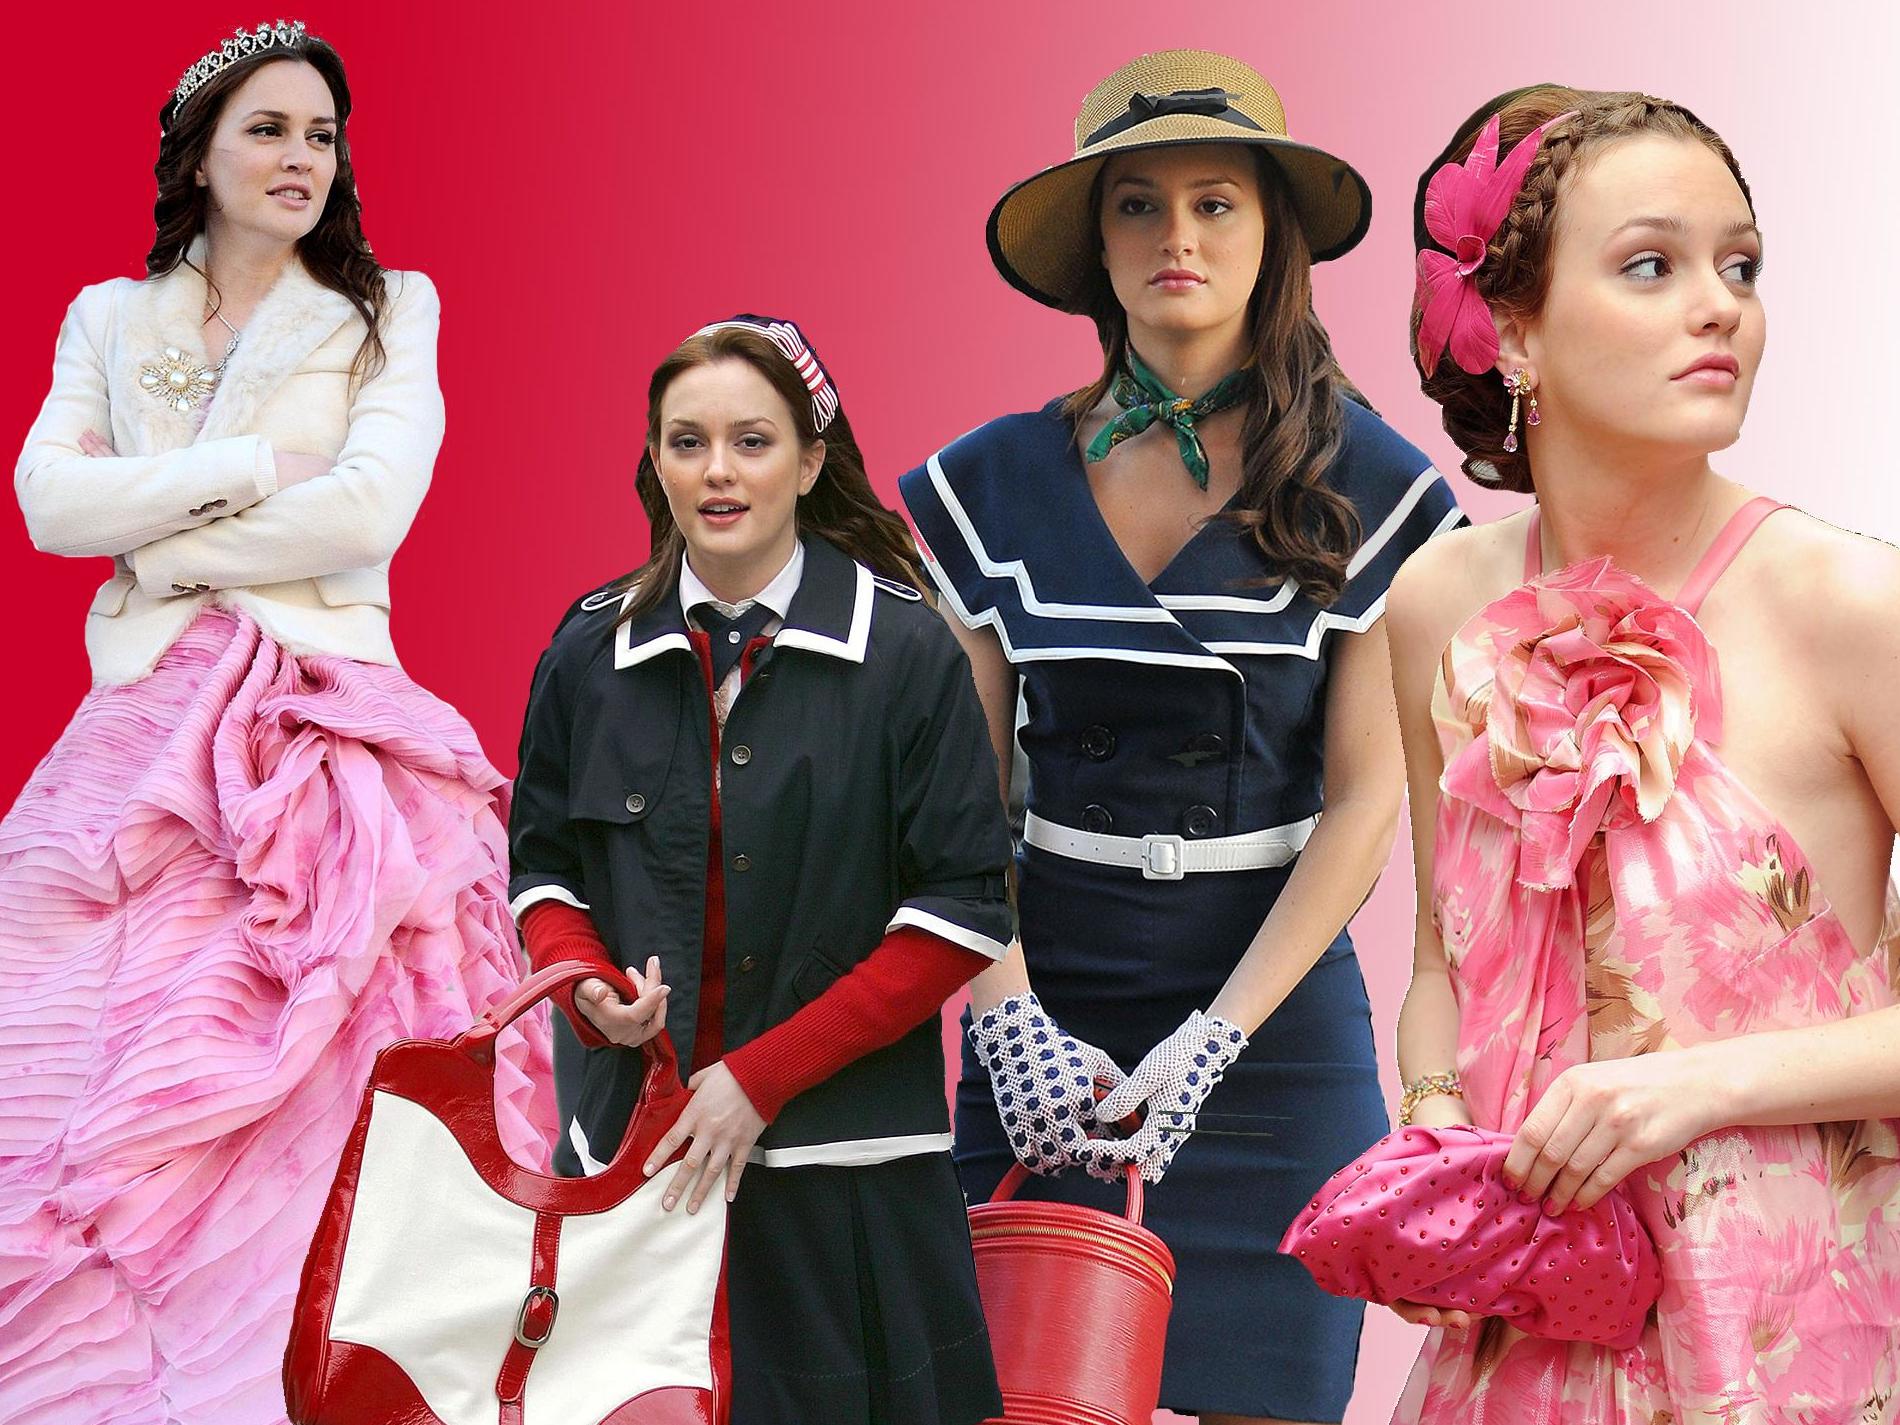 Can I Wear Red Tights Without Feeling Like Blair Waldorf? | Vogue